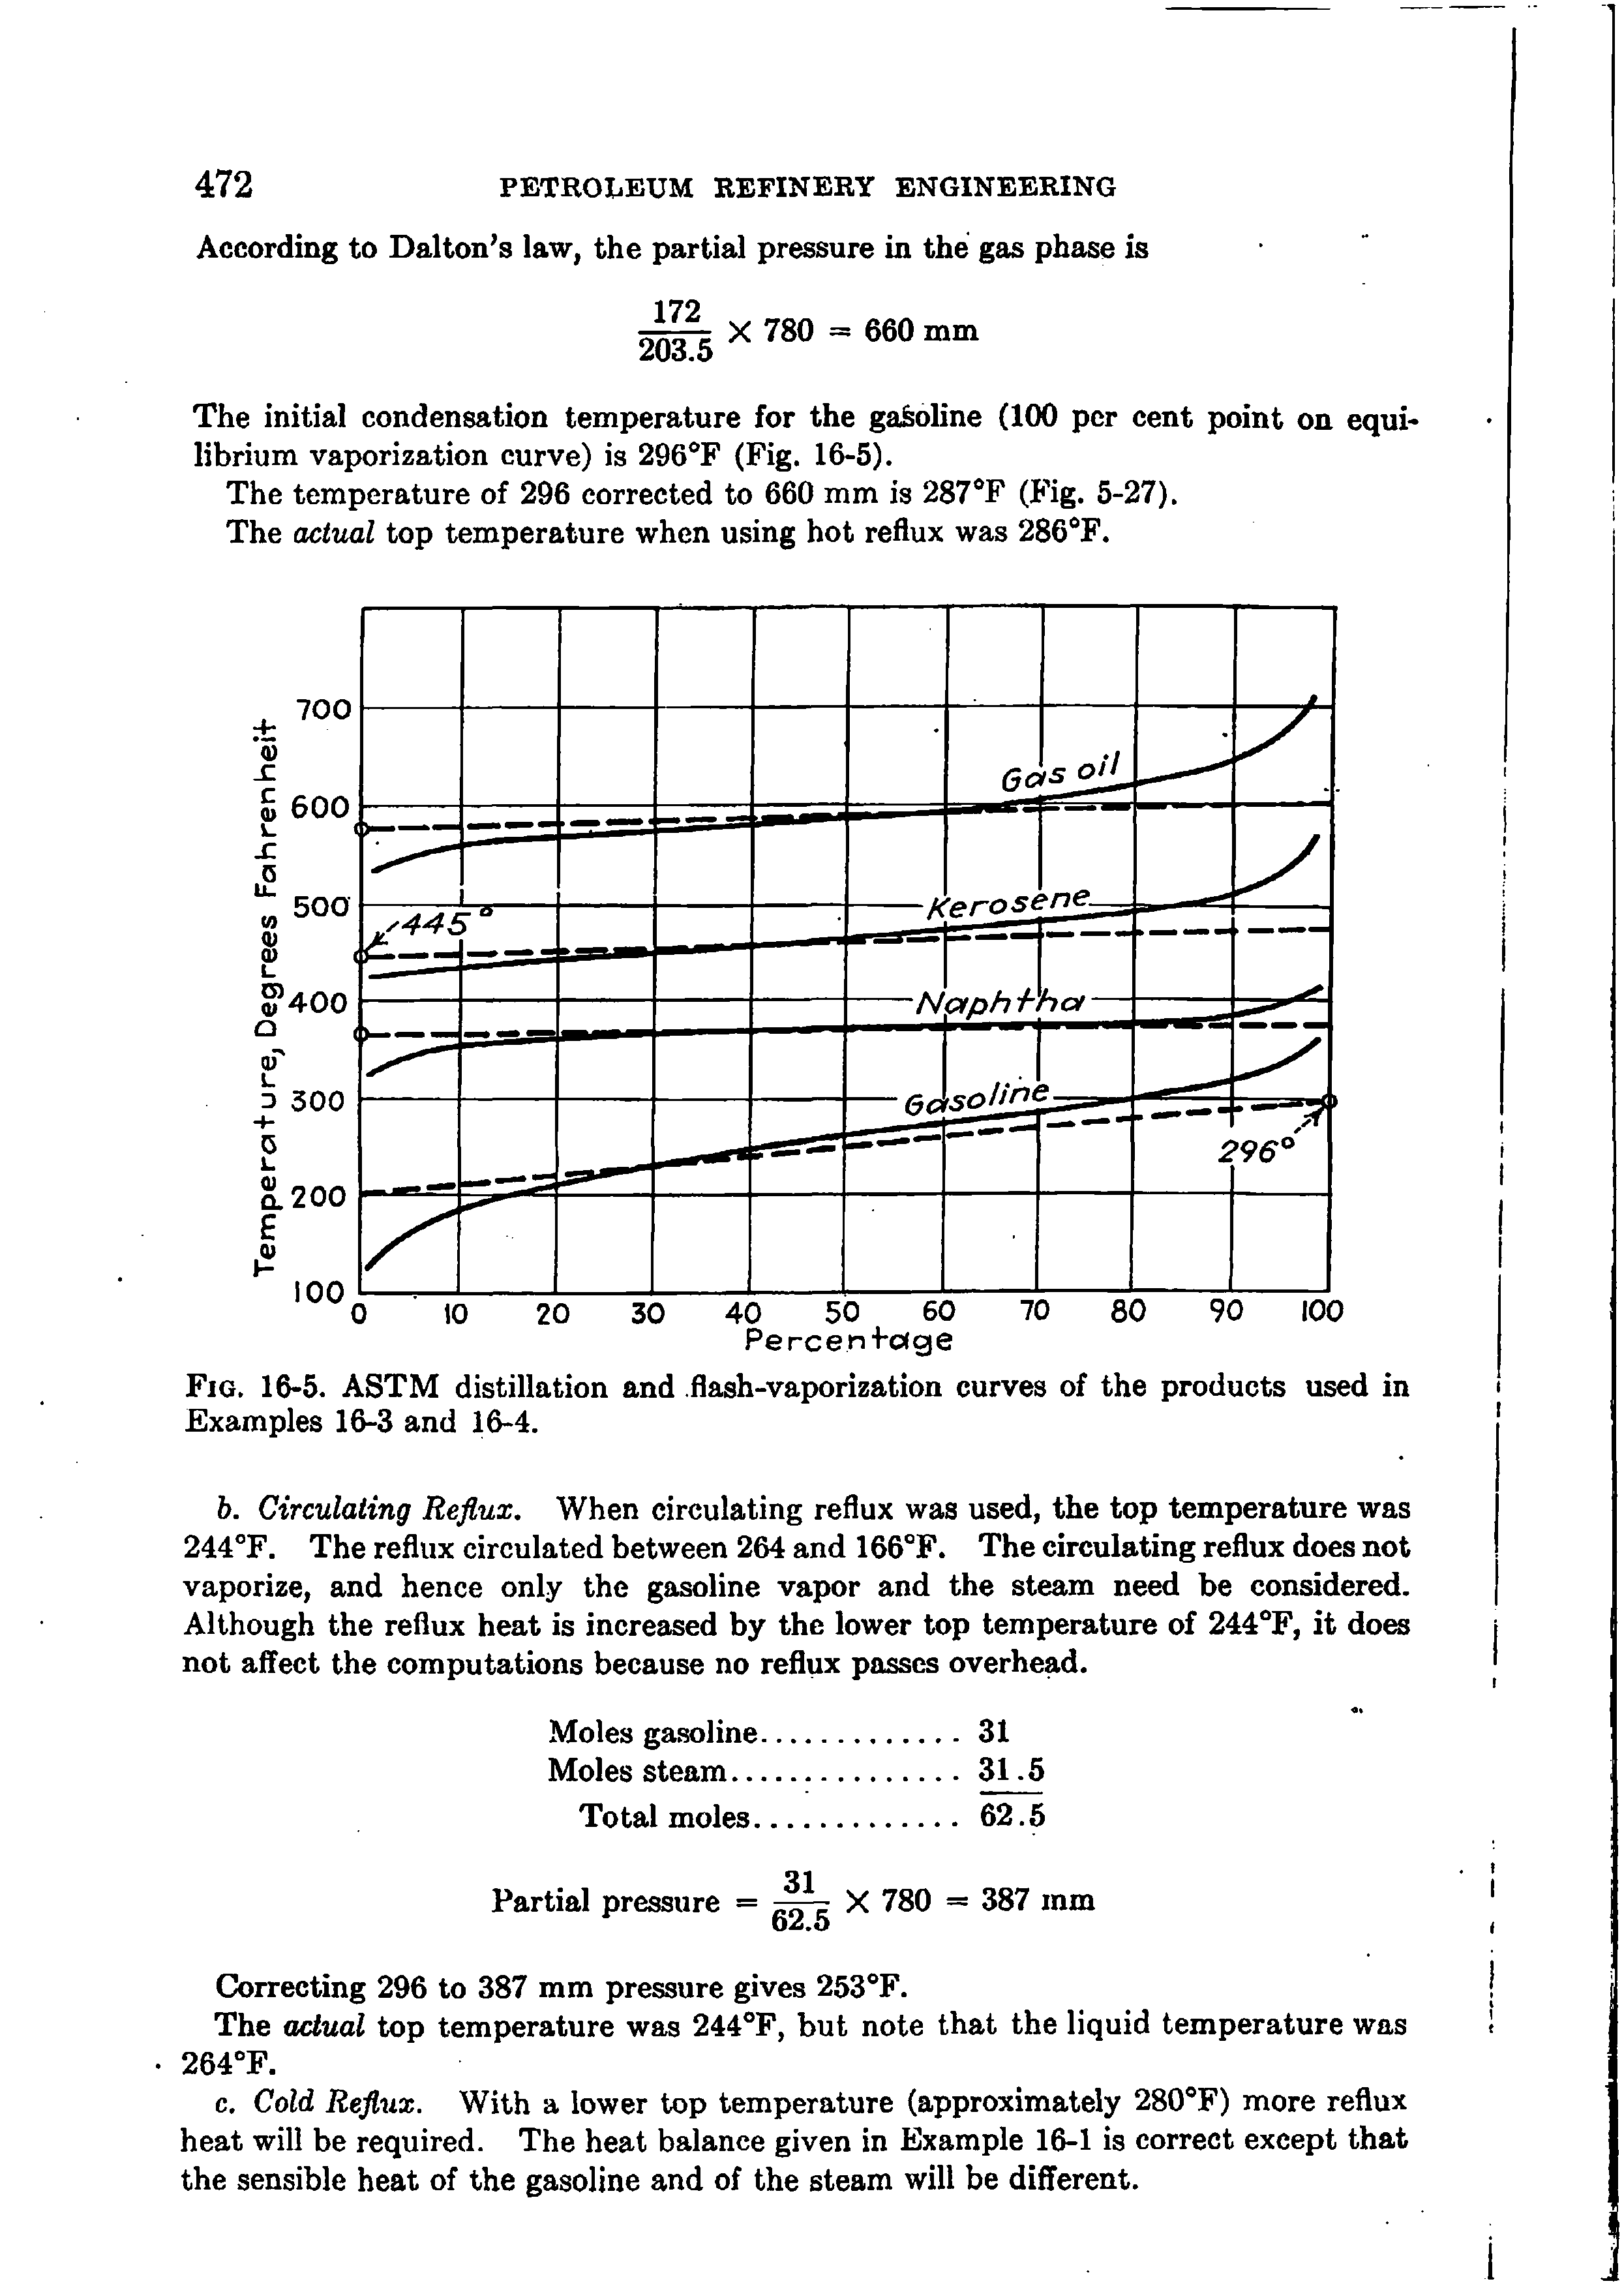 Fig. 16-5. ASTM distillation and. flash-vaporization curves of the products used in Examples 16-3 and 16-4.